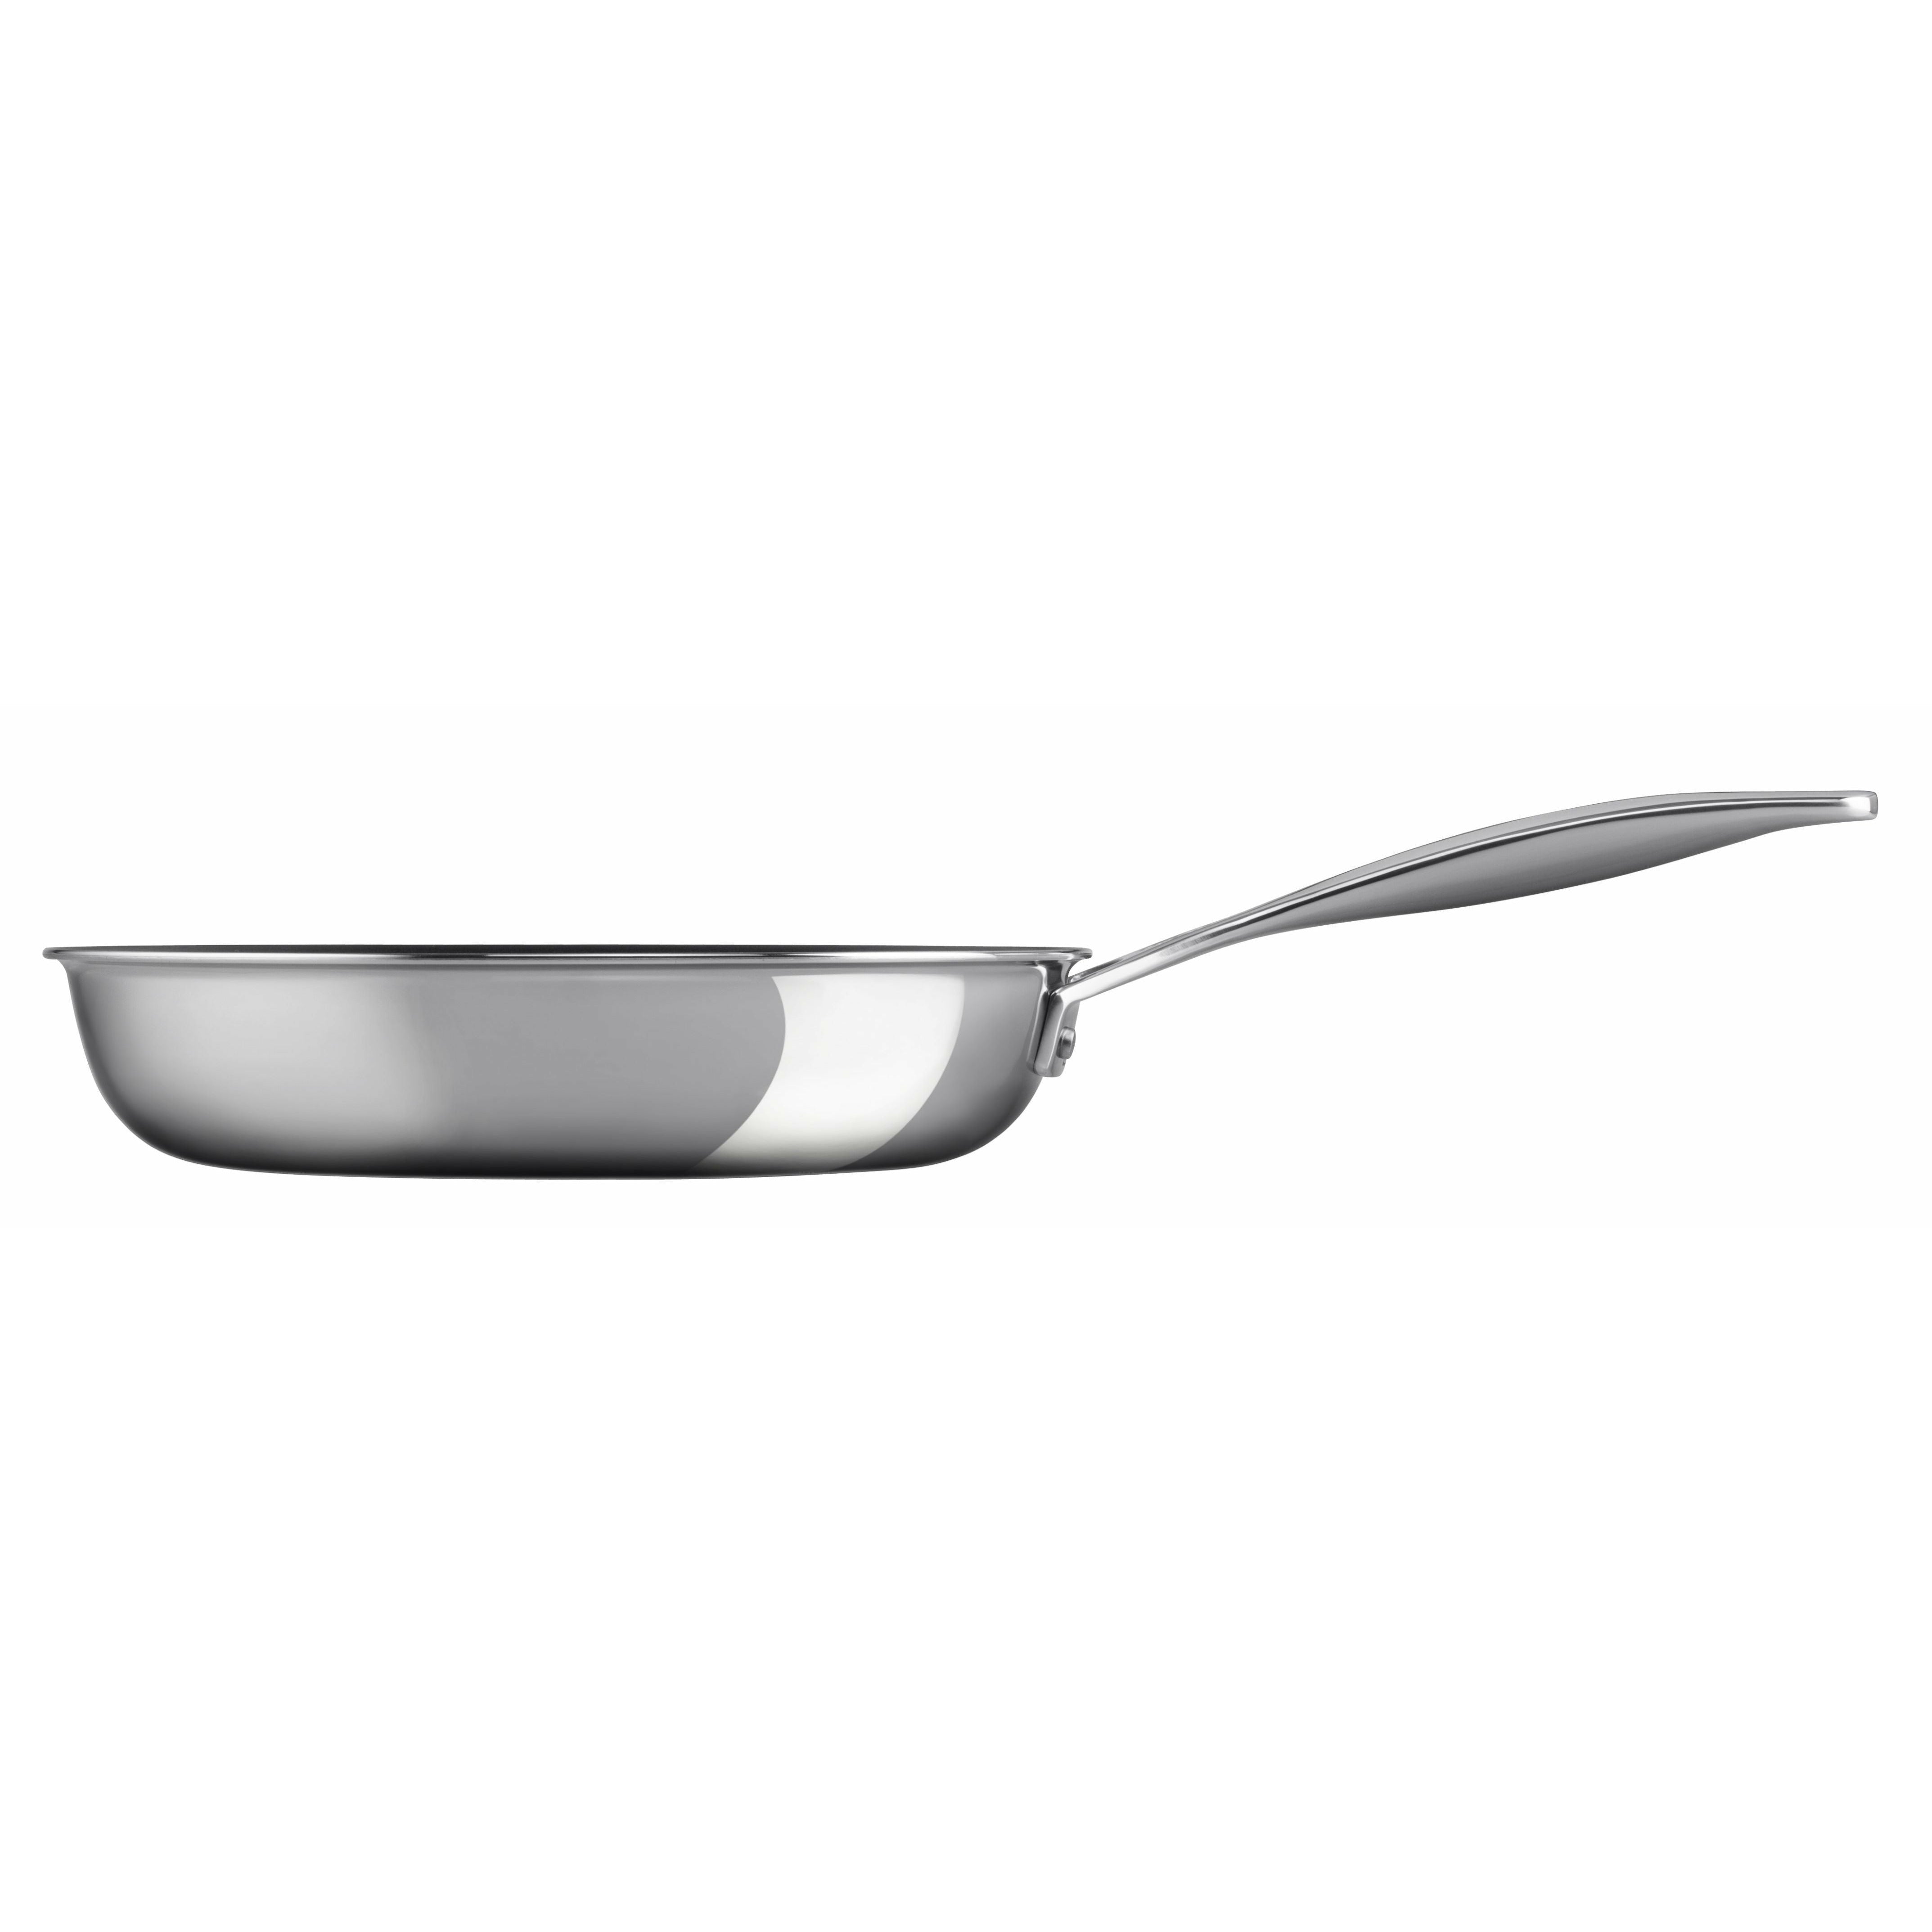 Le Creuset Signature Stainless Steel Uncoated Frying Pan, 24 Cm